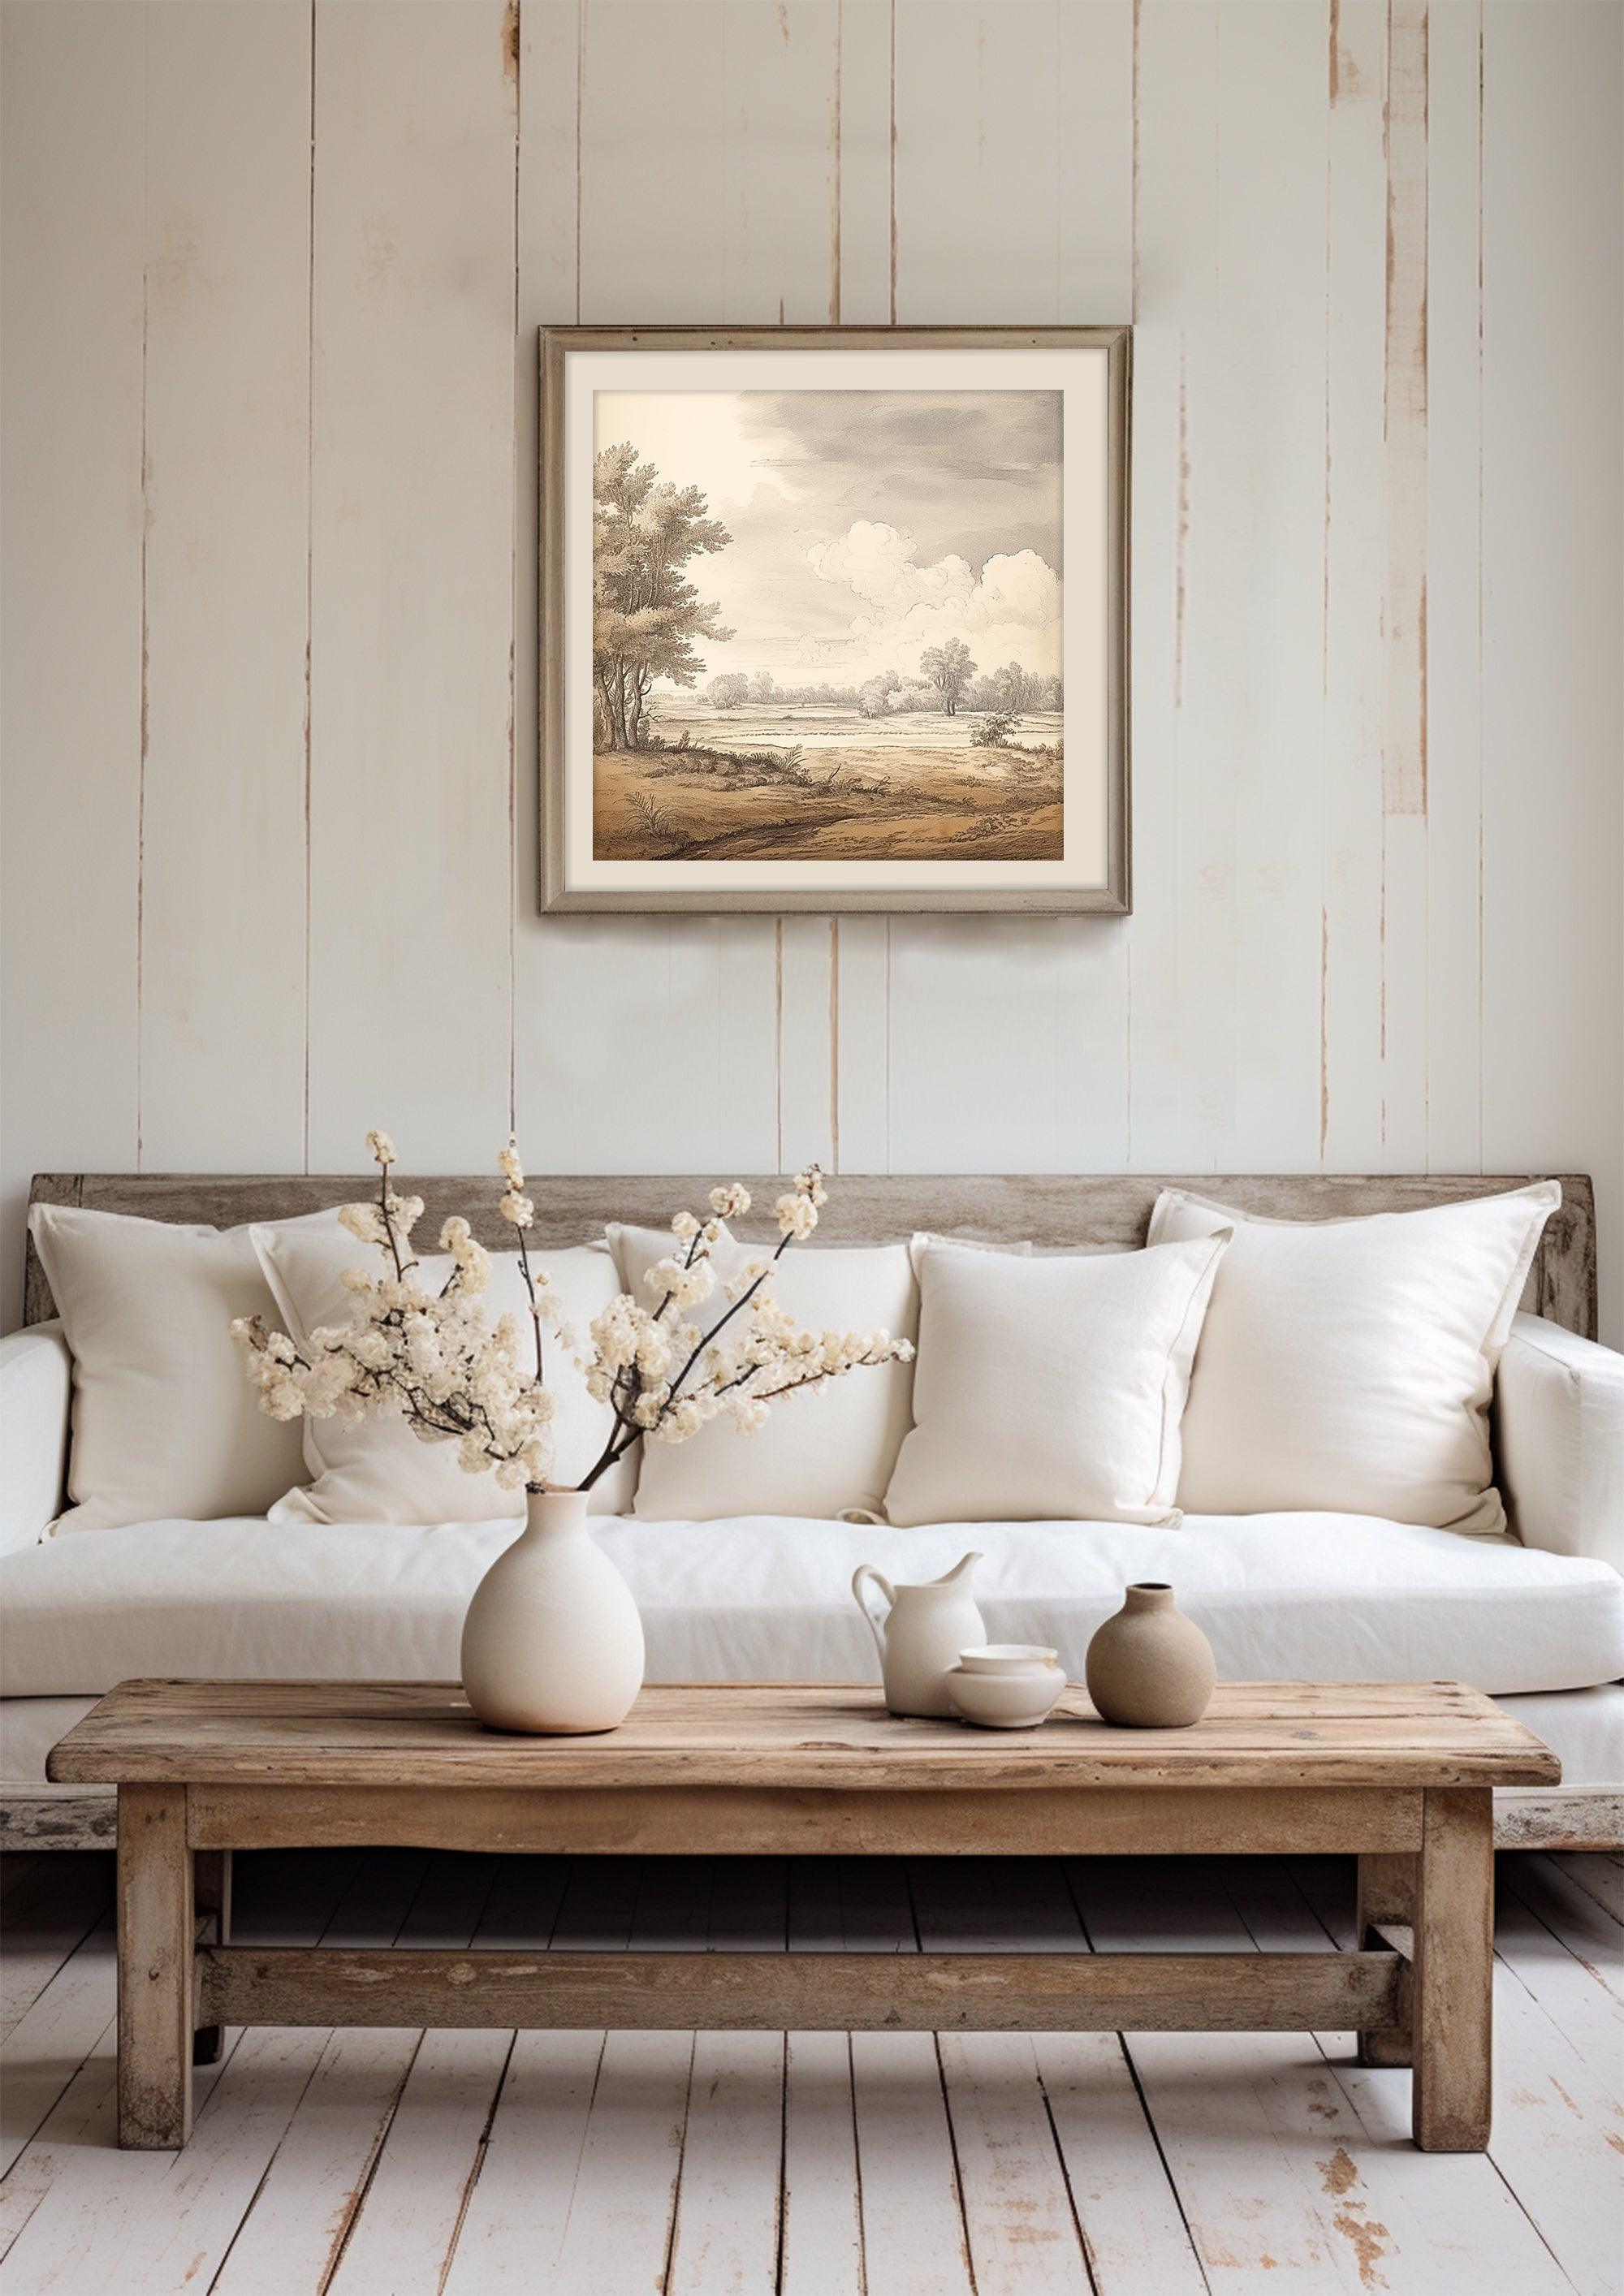 Classical Landscape | Vintage Wall Art | Sketch Etching Printing |Moody Wall Decor |Home Decor Aesthetics|Study Living Room Decoration Print|PRINTABLE Art |Digital Download